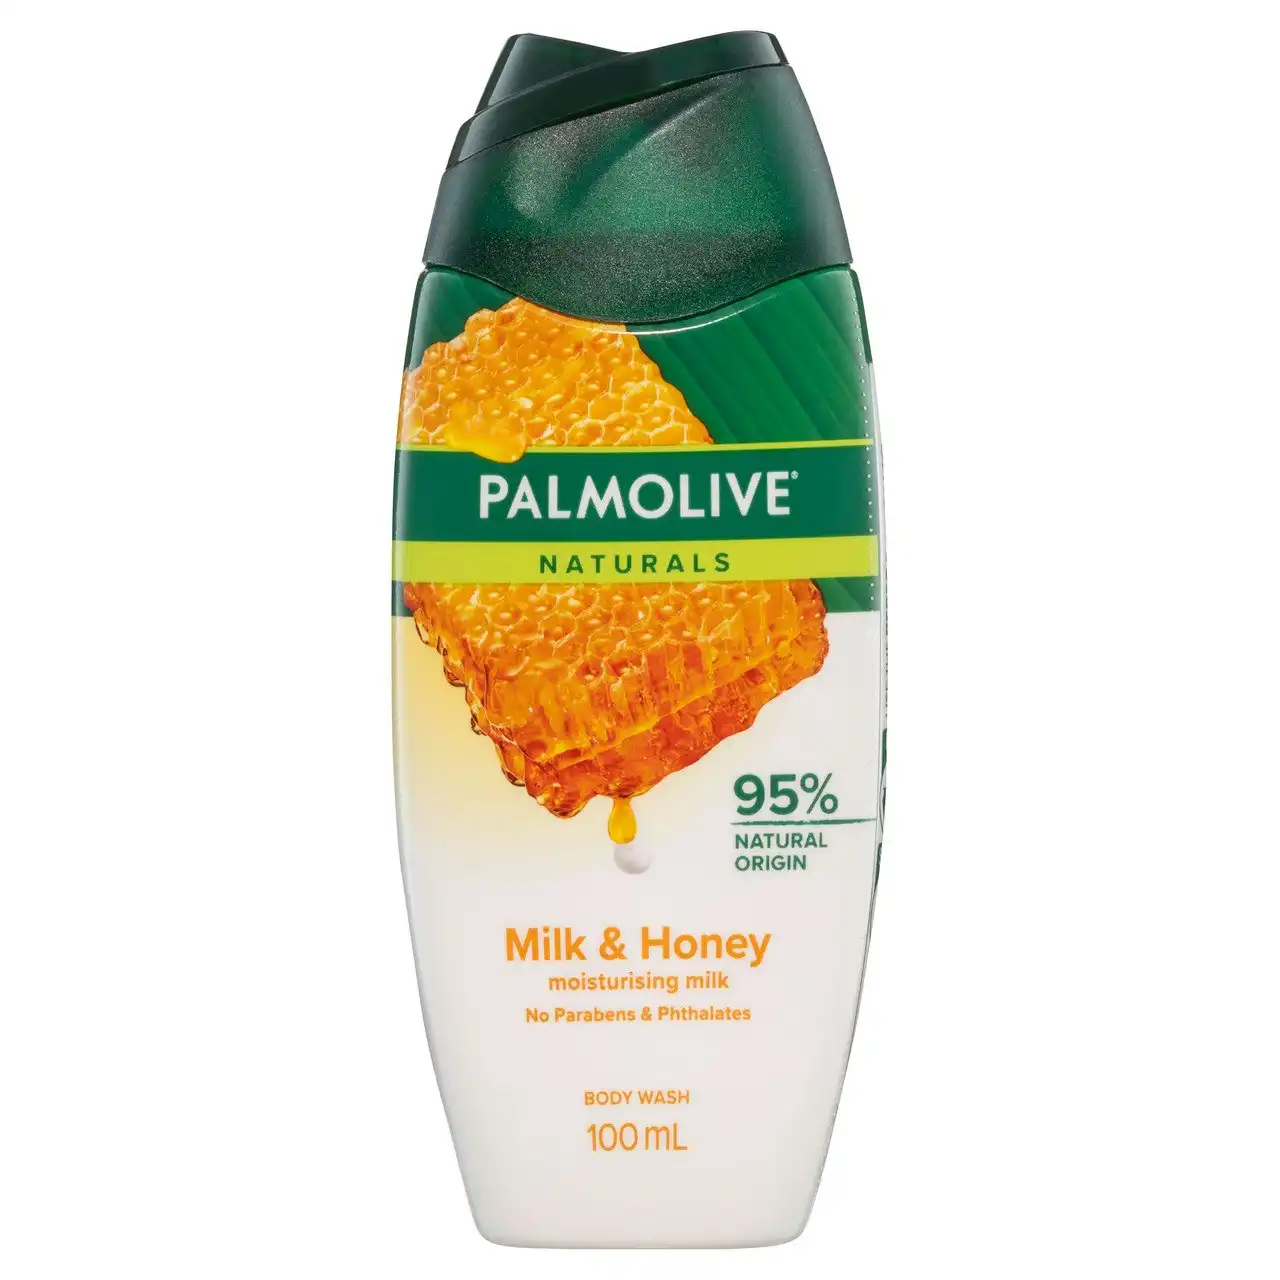 Palmolive Naturals Body Wash, 100mL, Milk and Honey, with Moisturising Milk, No Parabens Phthalates or Alcohol